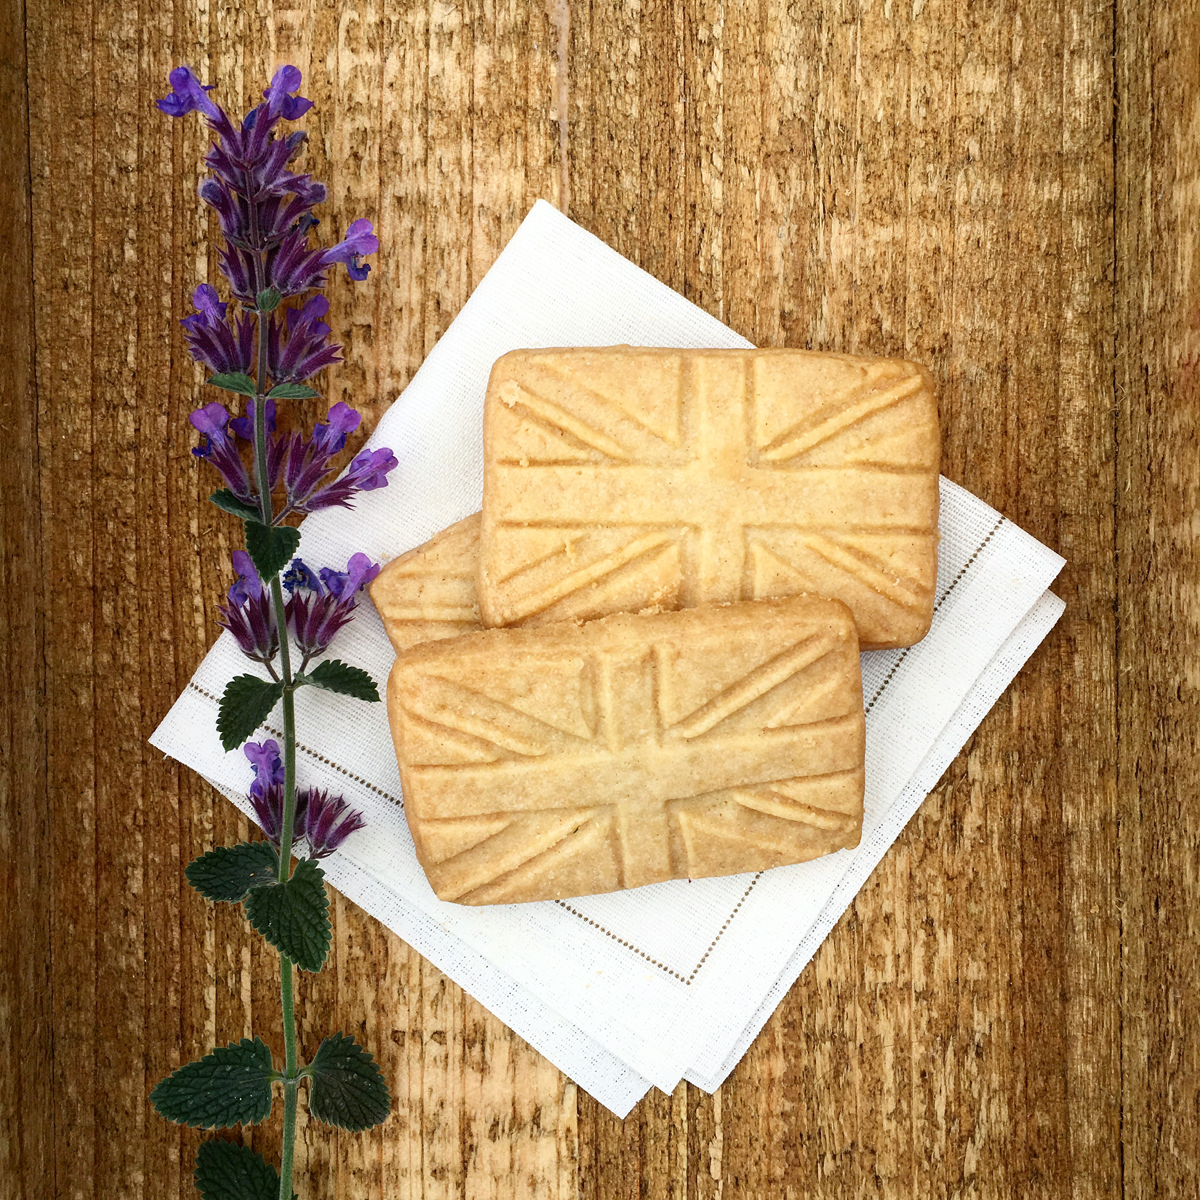 The Story of a Seamstress: Scottish Shortbread